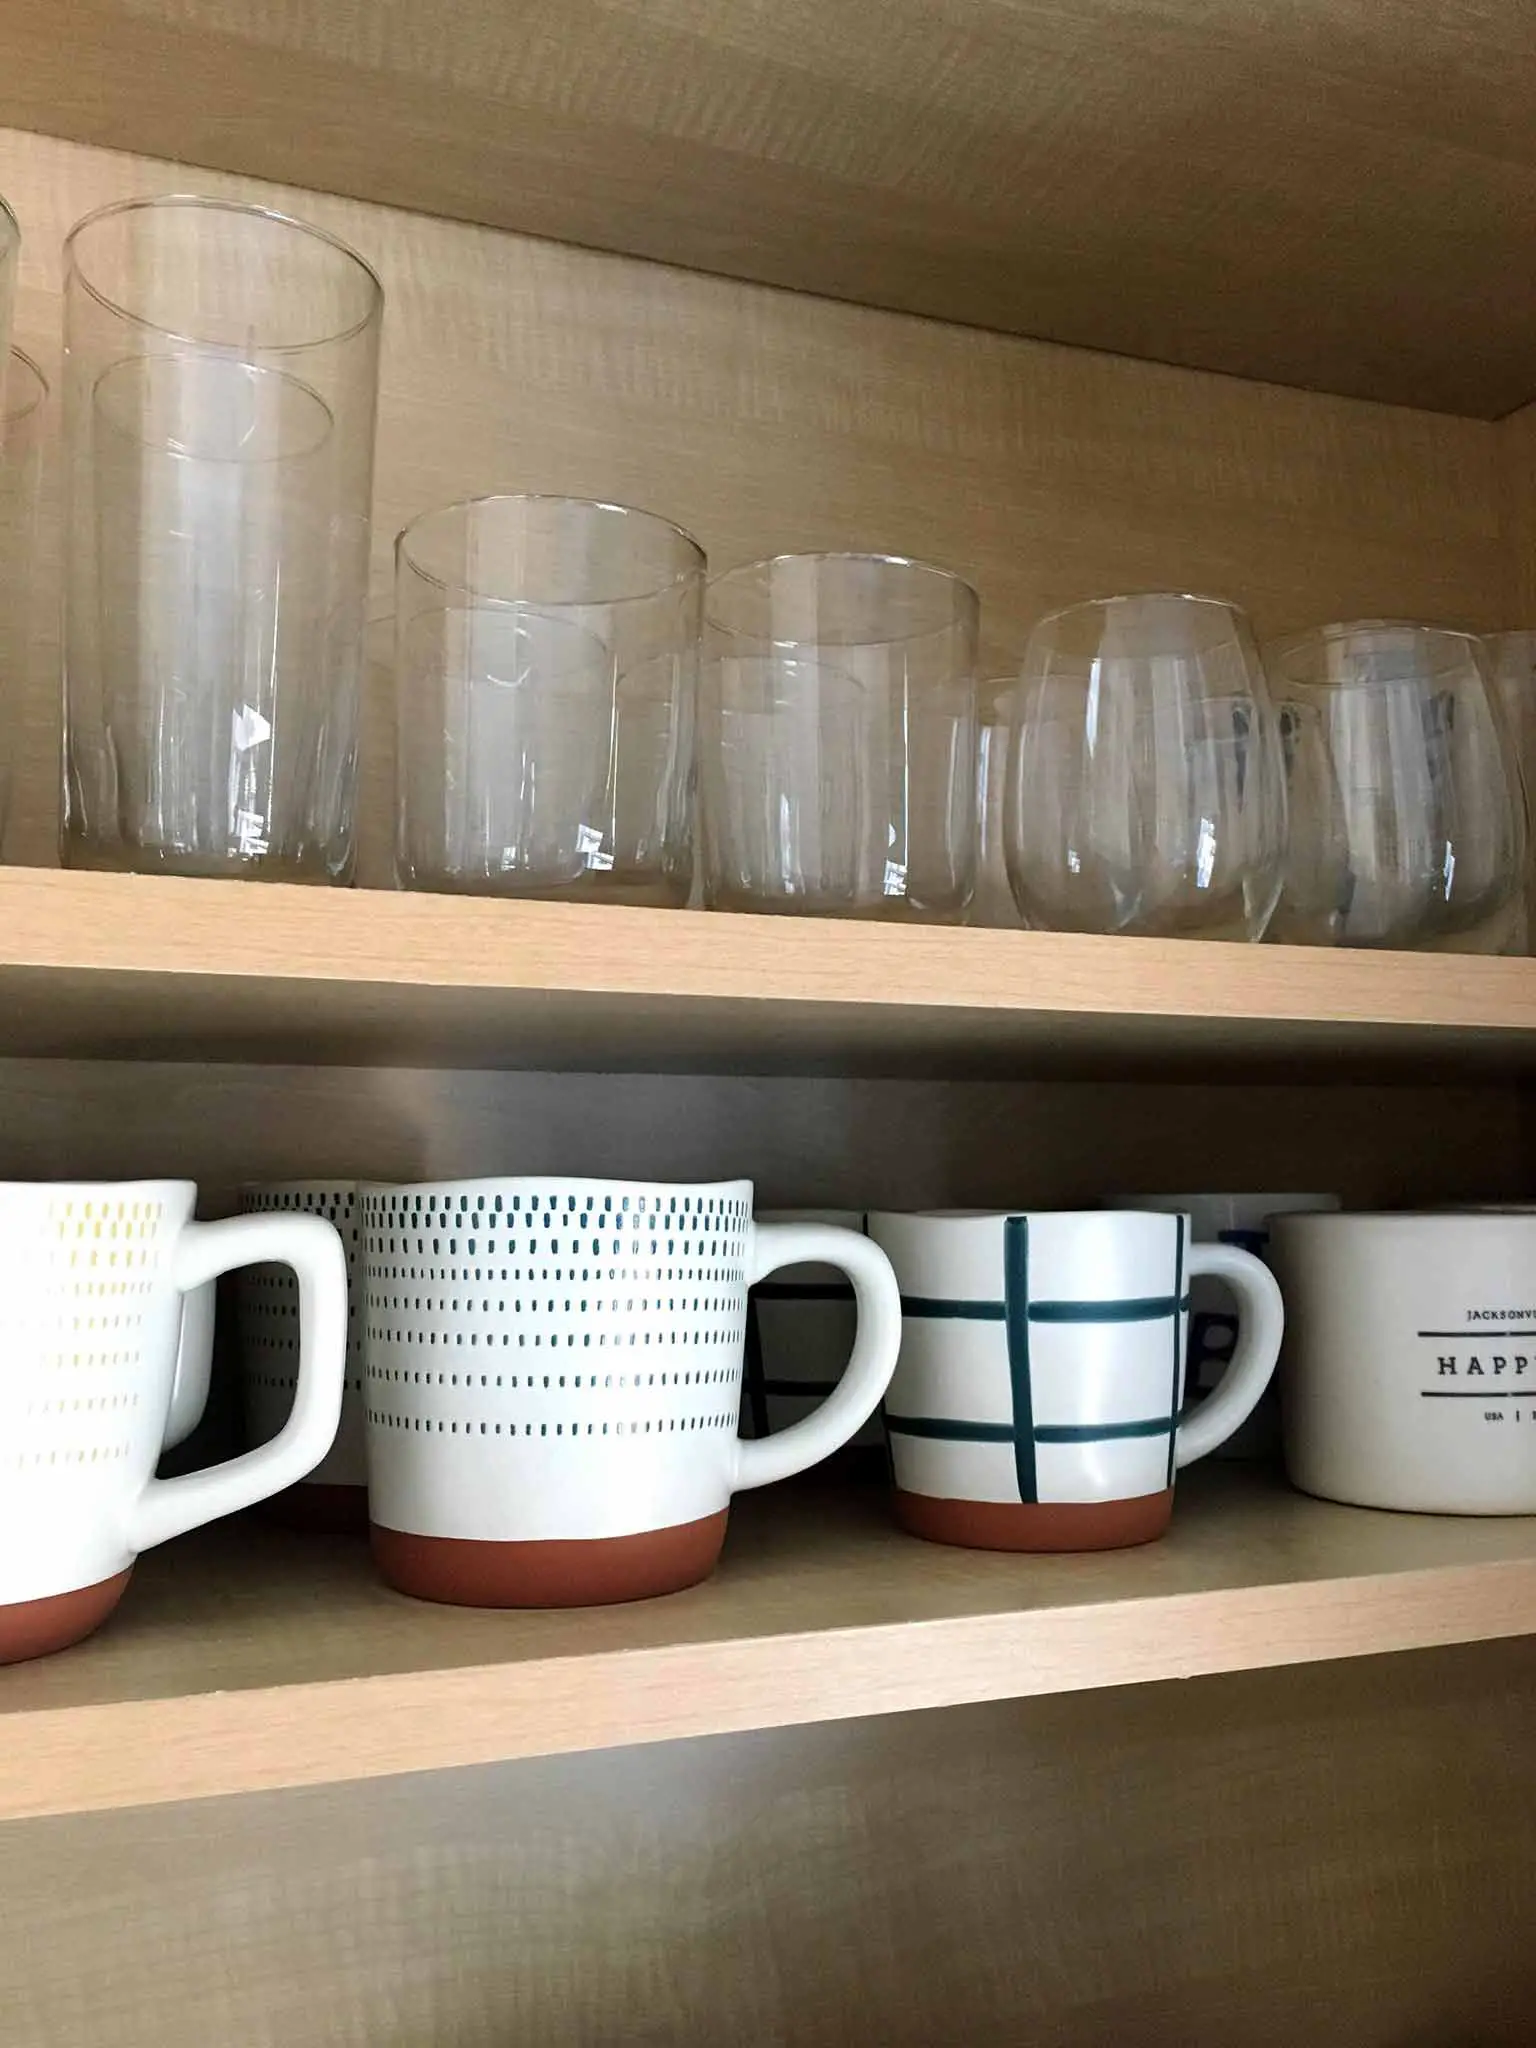 Target Hearth and Hand Stoneware Mugs with Project 62 Glassware